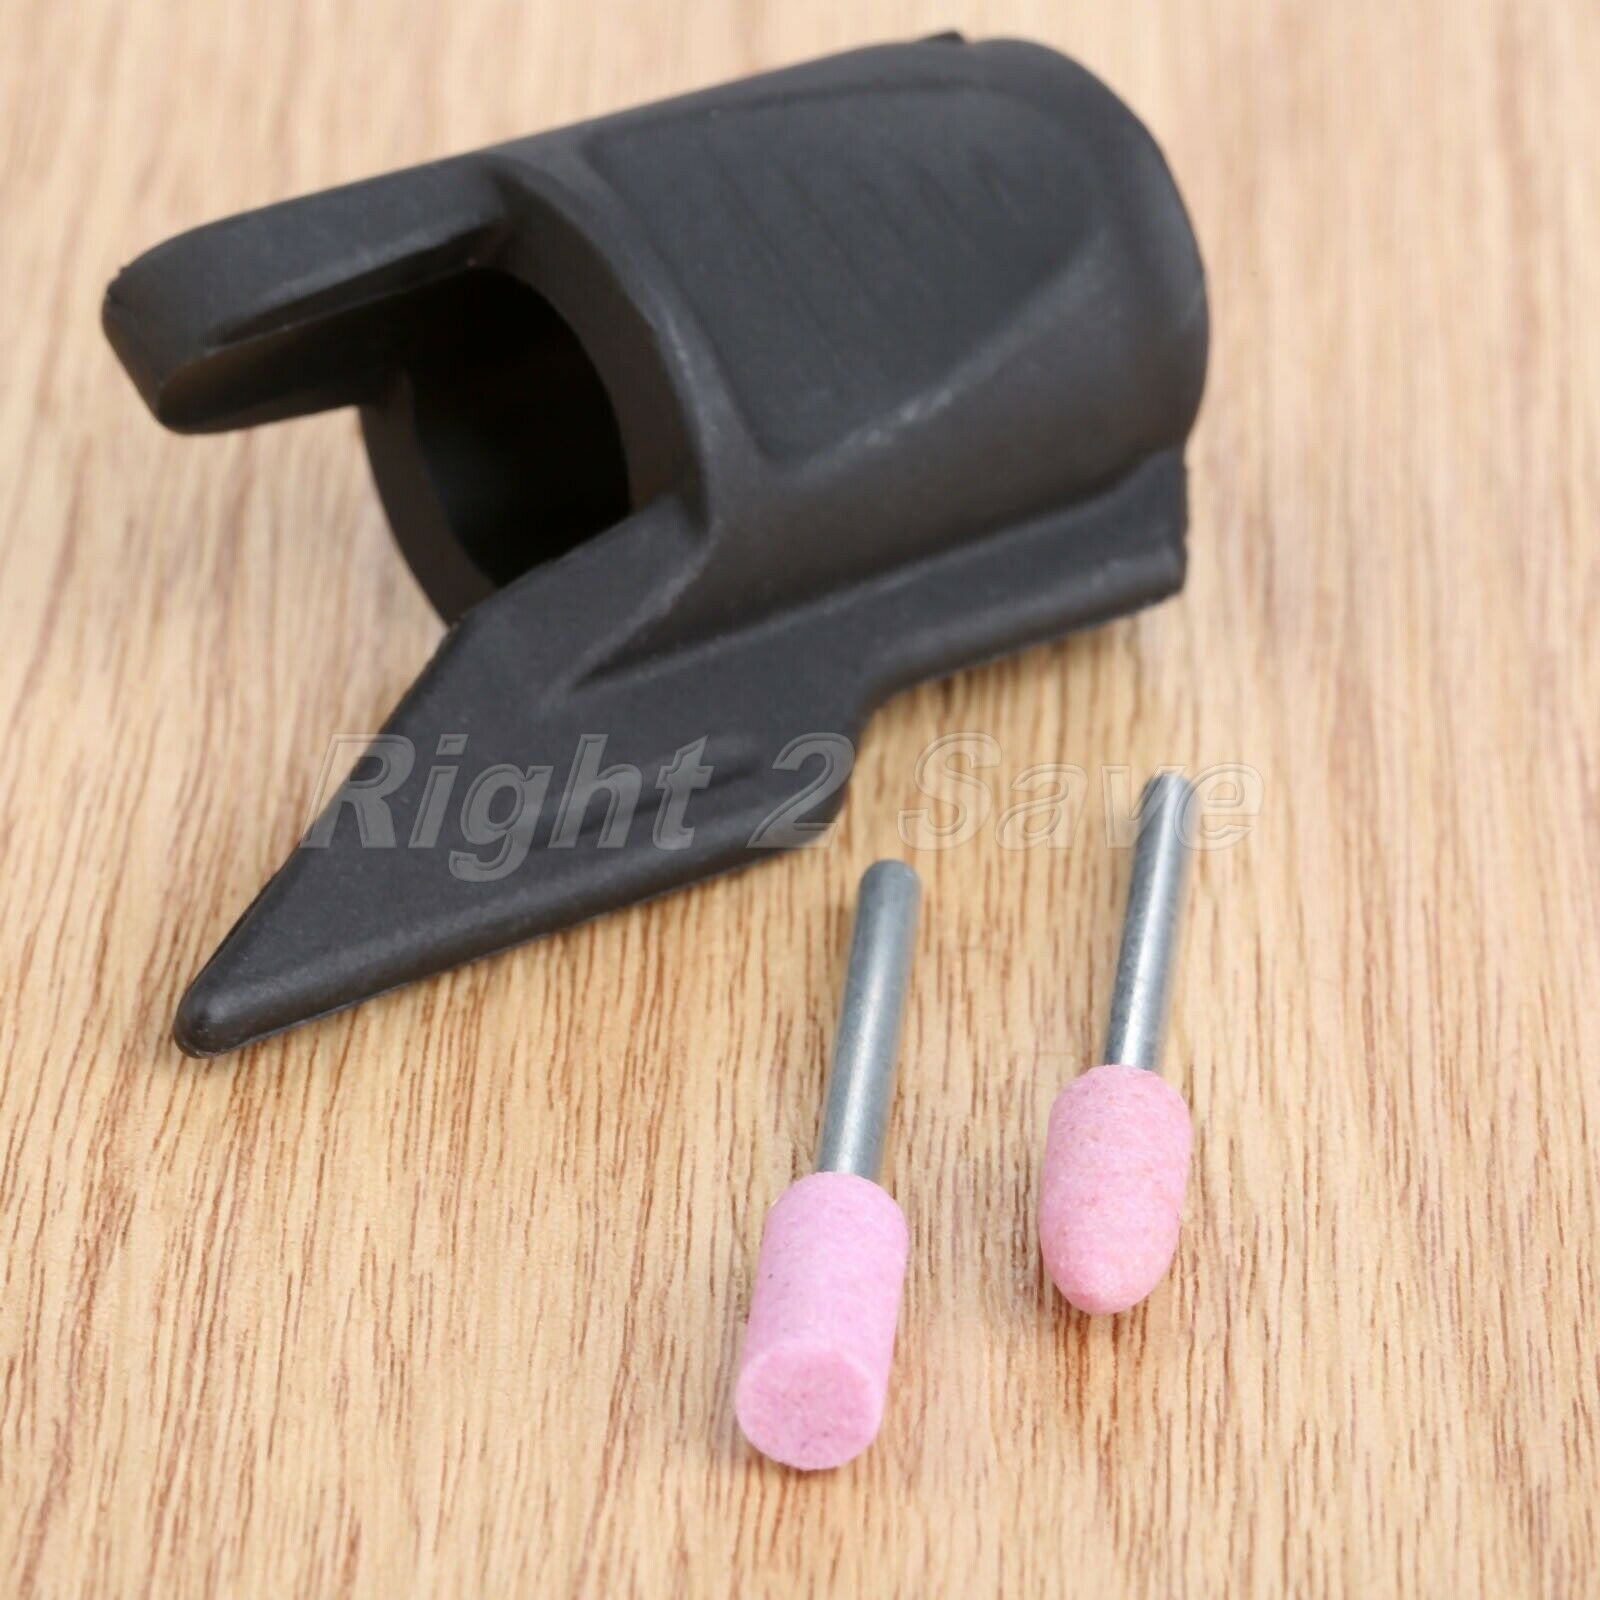 1 Set Saw Sharpening Attachment Guide Drill Adapter Rotary Sharpener Power Tool